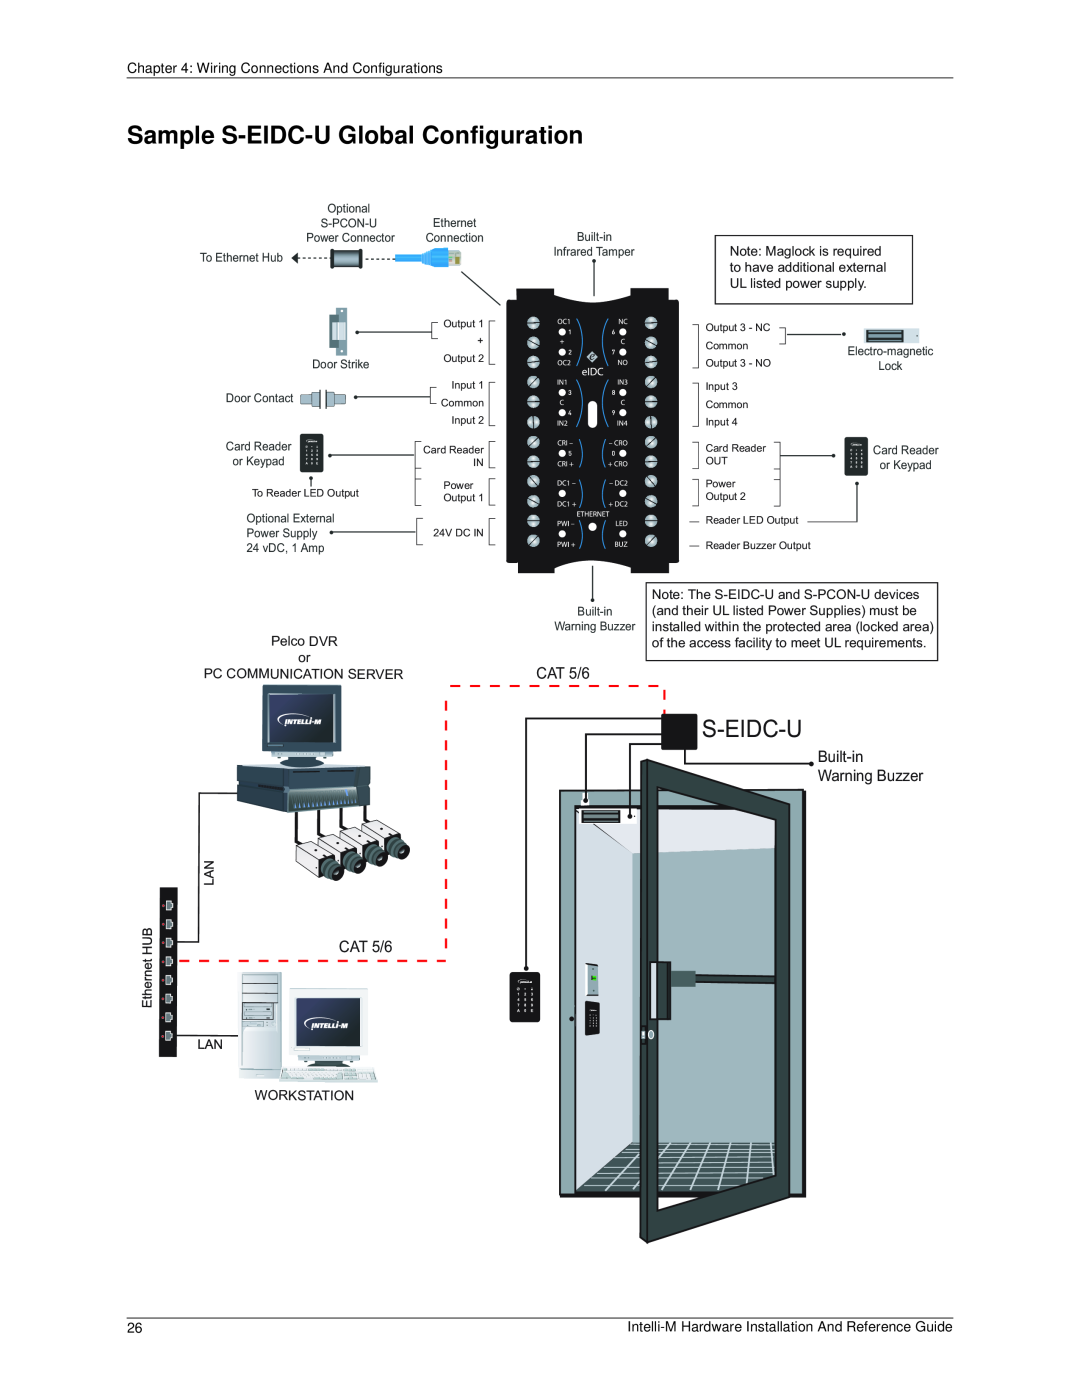 Pelco c3653m-a manual Sample S-EIDC-UGlobal Configuration, S-Eidc-U, Wiring Connections And Configurations 